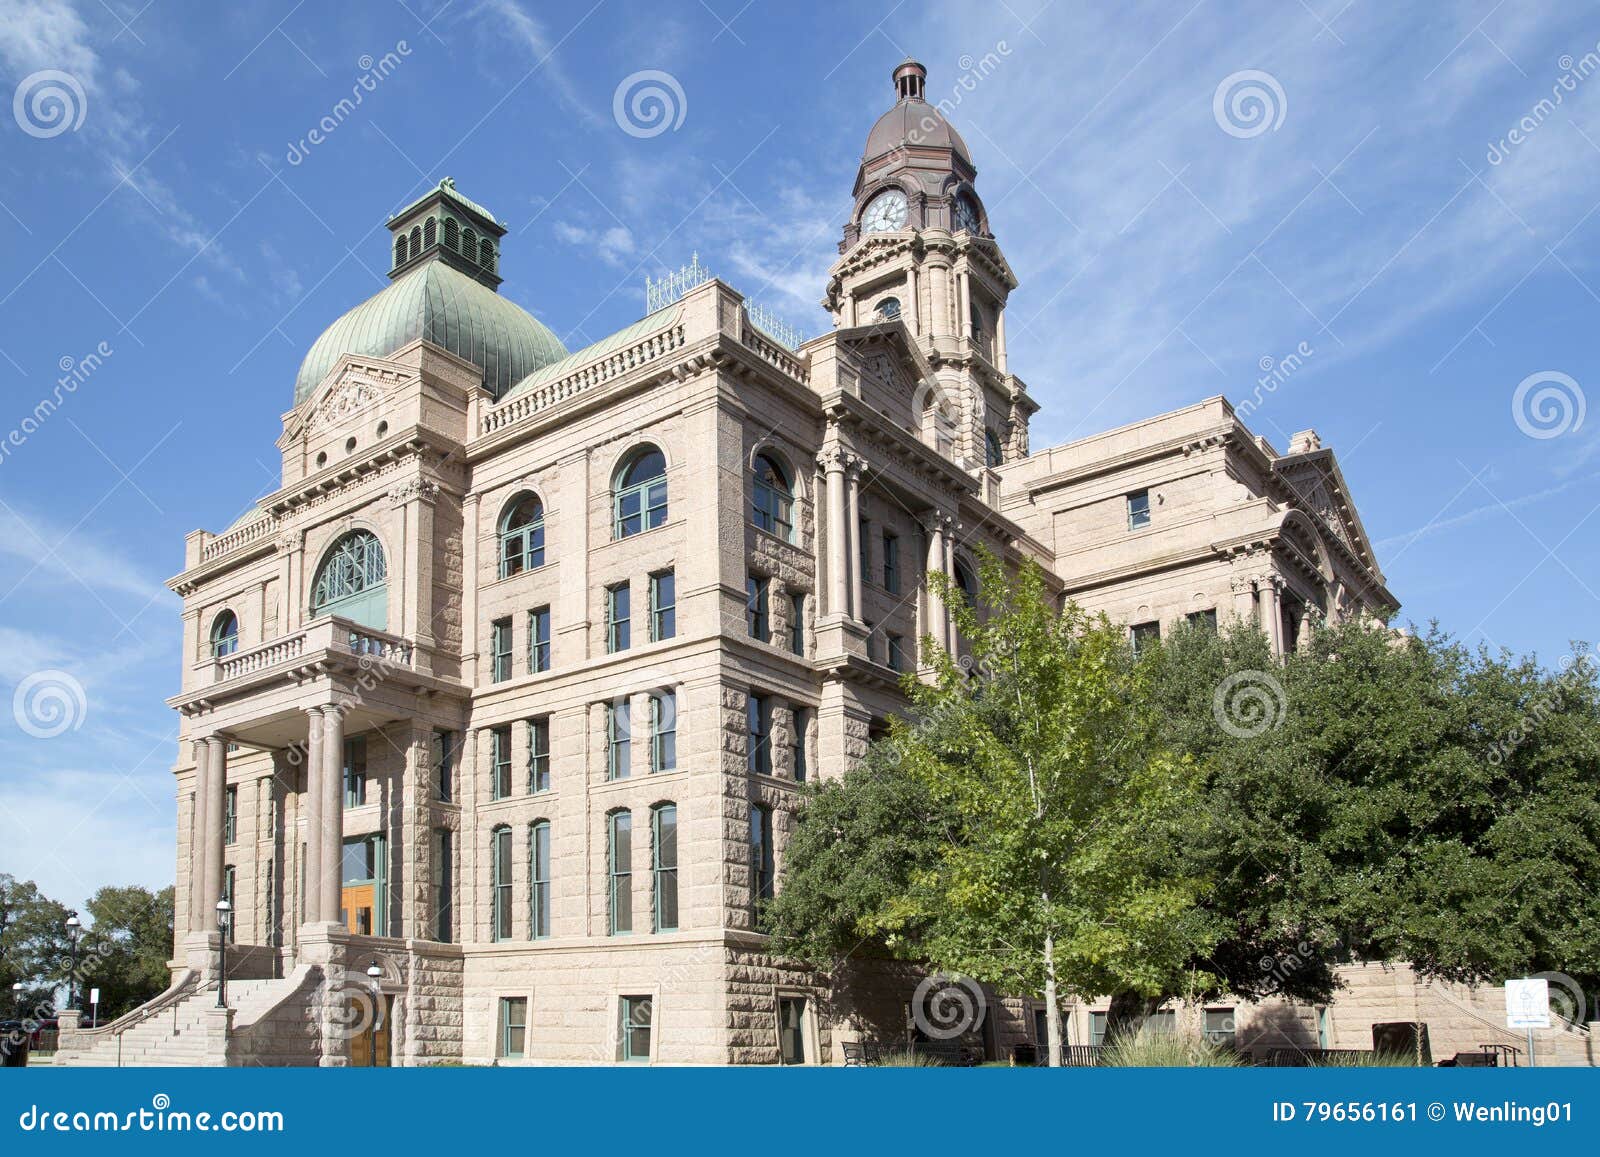 nice historic building tarrant county courthouse